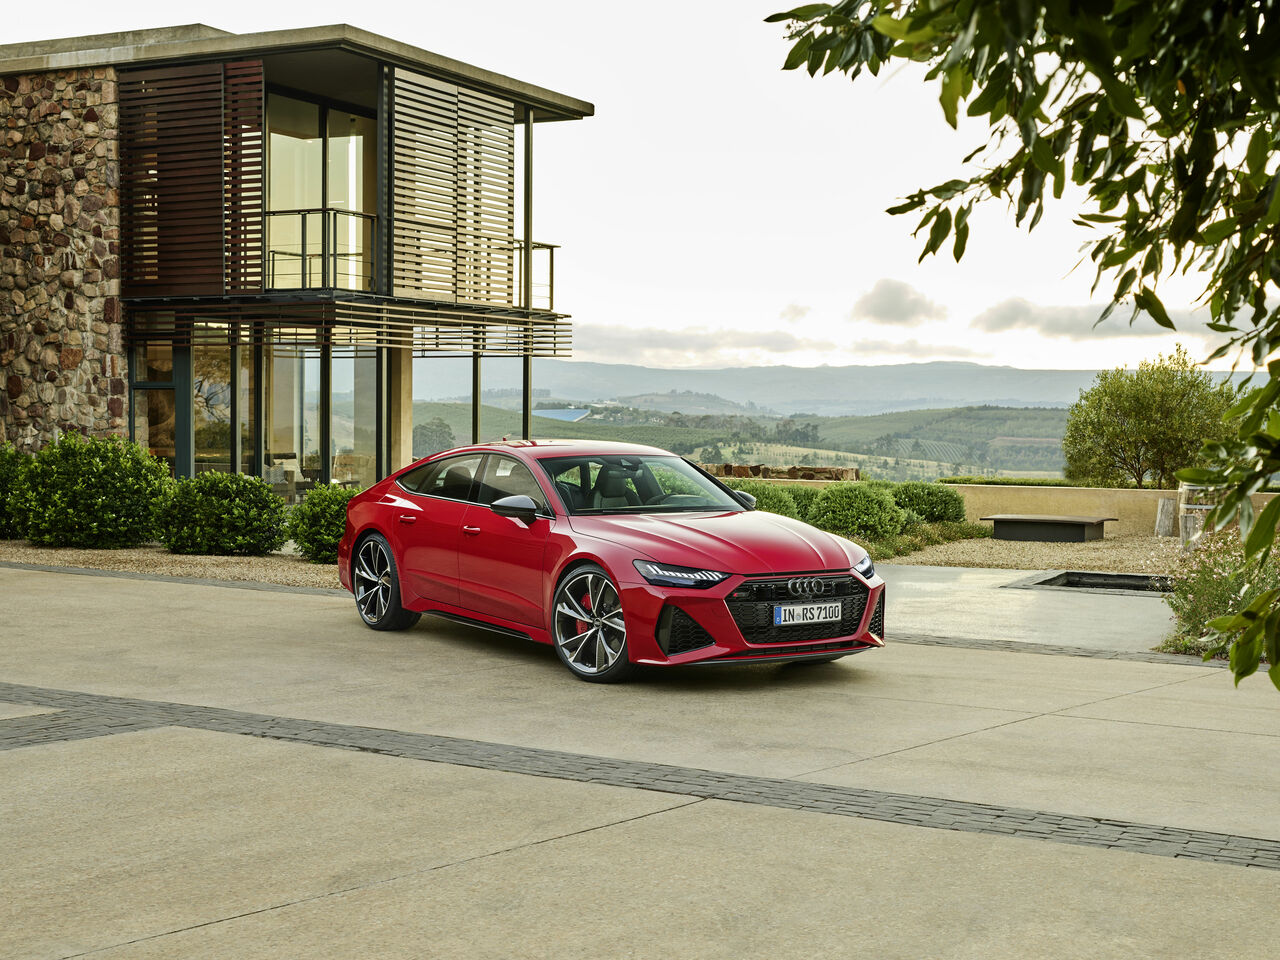 High Performance and Innovative Design: The all-new Audi RS 7 Sportback